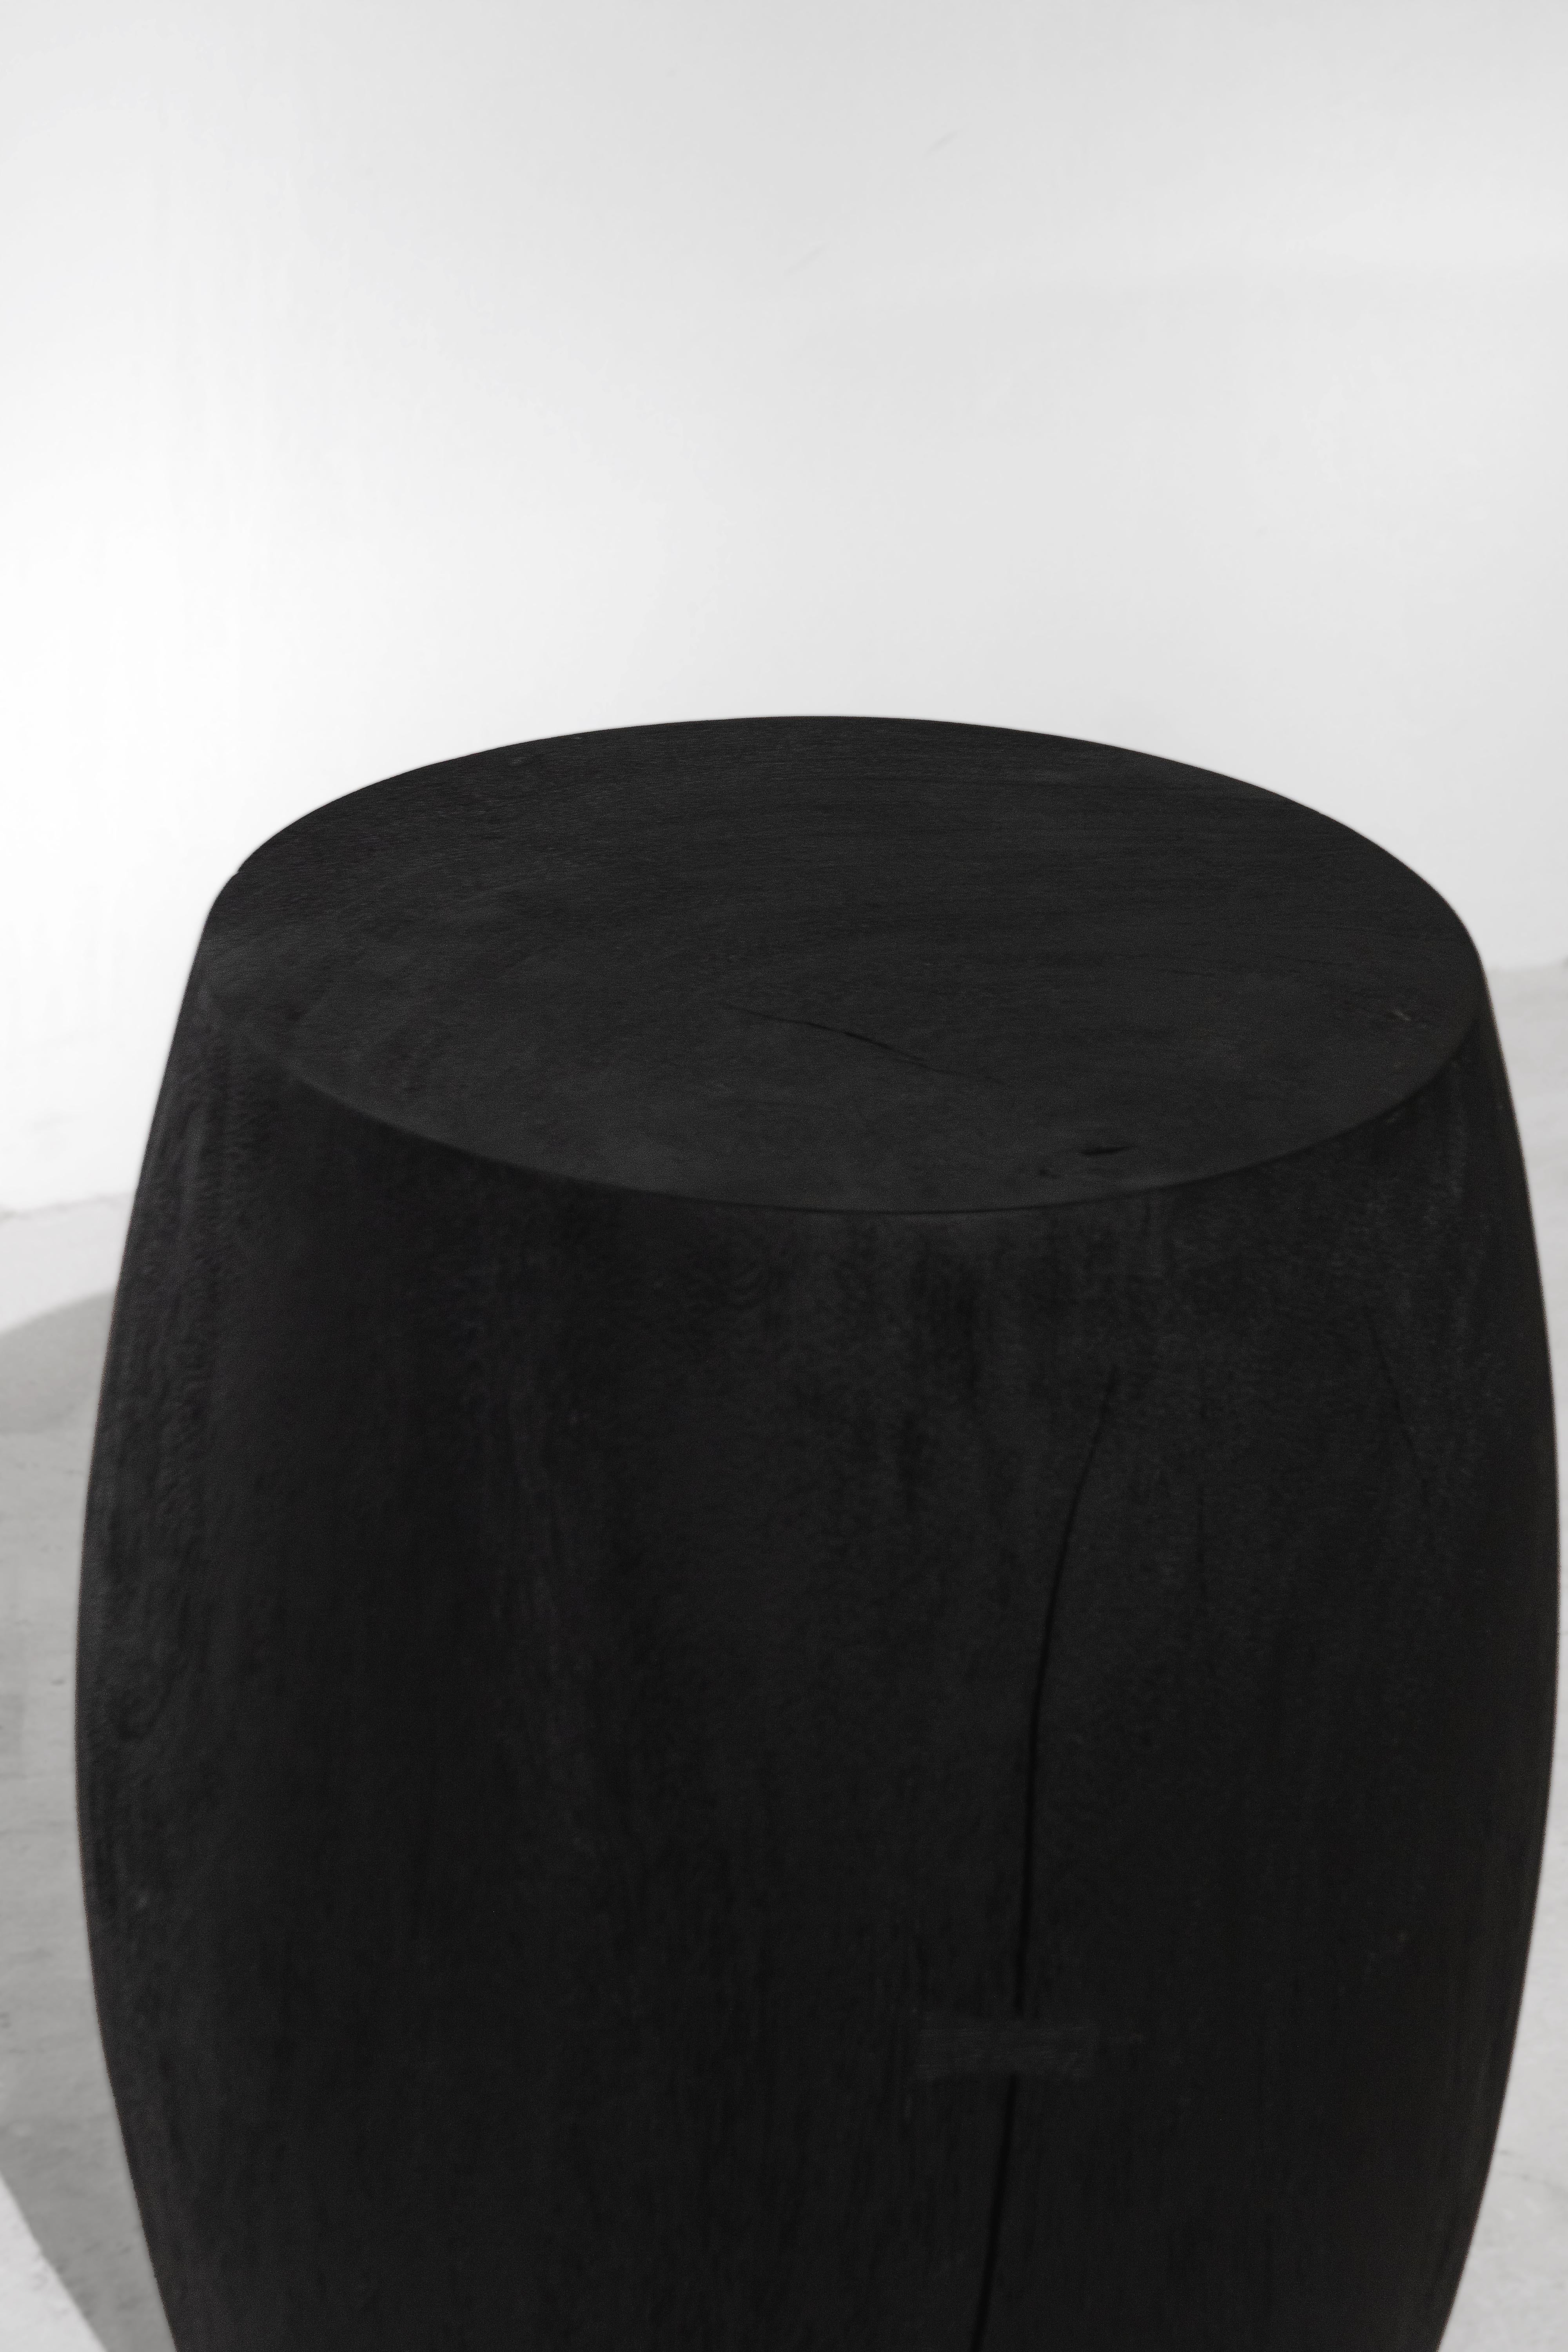 Hand-Crafted GROM stool, Rough Black Monkey Pod finishing For Sale